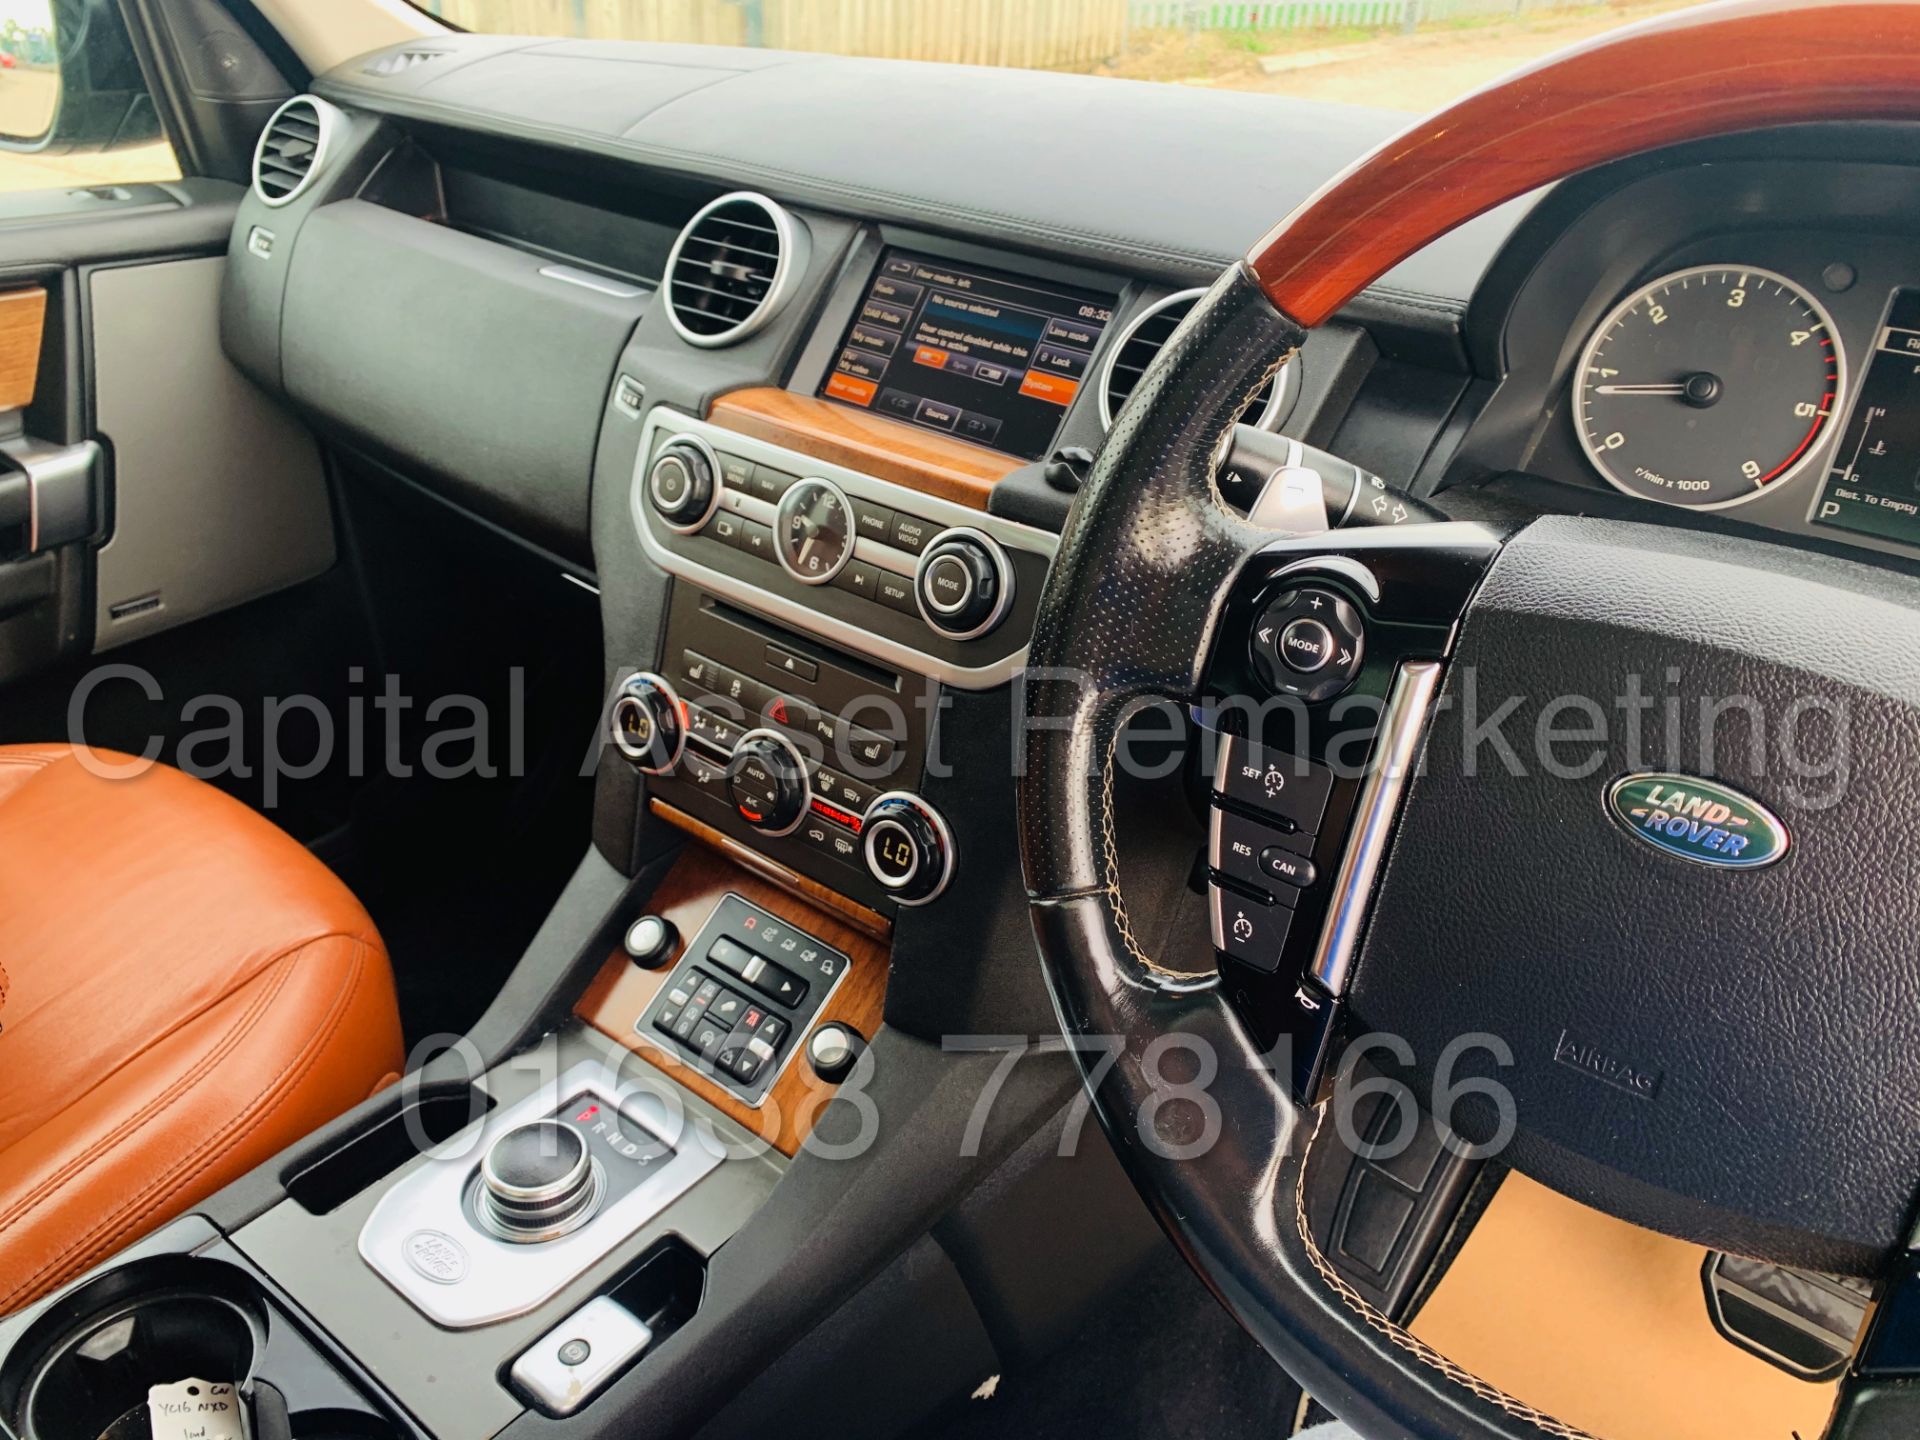 (On Sale) LAND ROVER DISCOVERY 4 *LANDMARK* 7 SEATER SUV (2016) '3.0 SDV6 - 8 SPEED AUTO' (1 OWNER) - Image 53 of 65